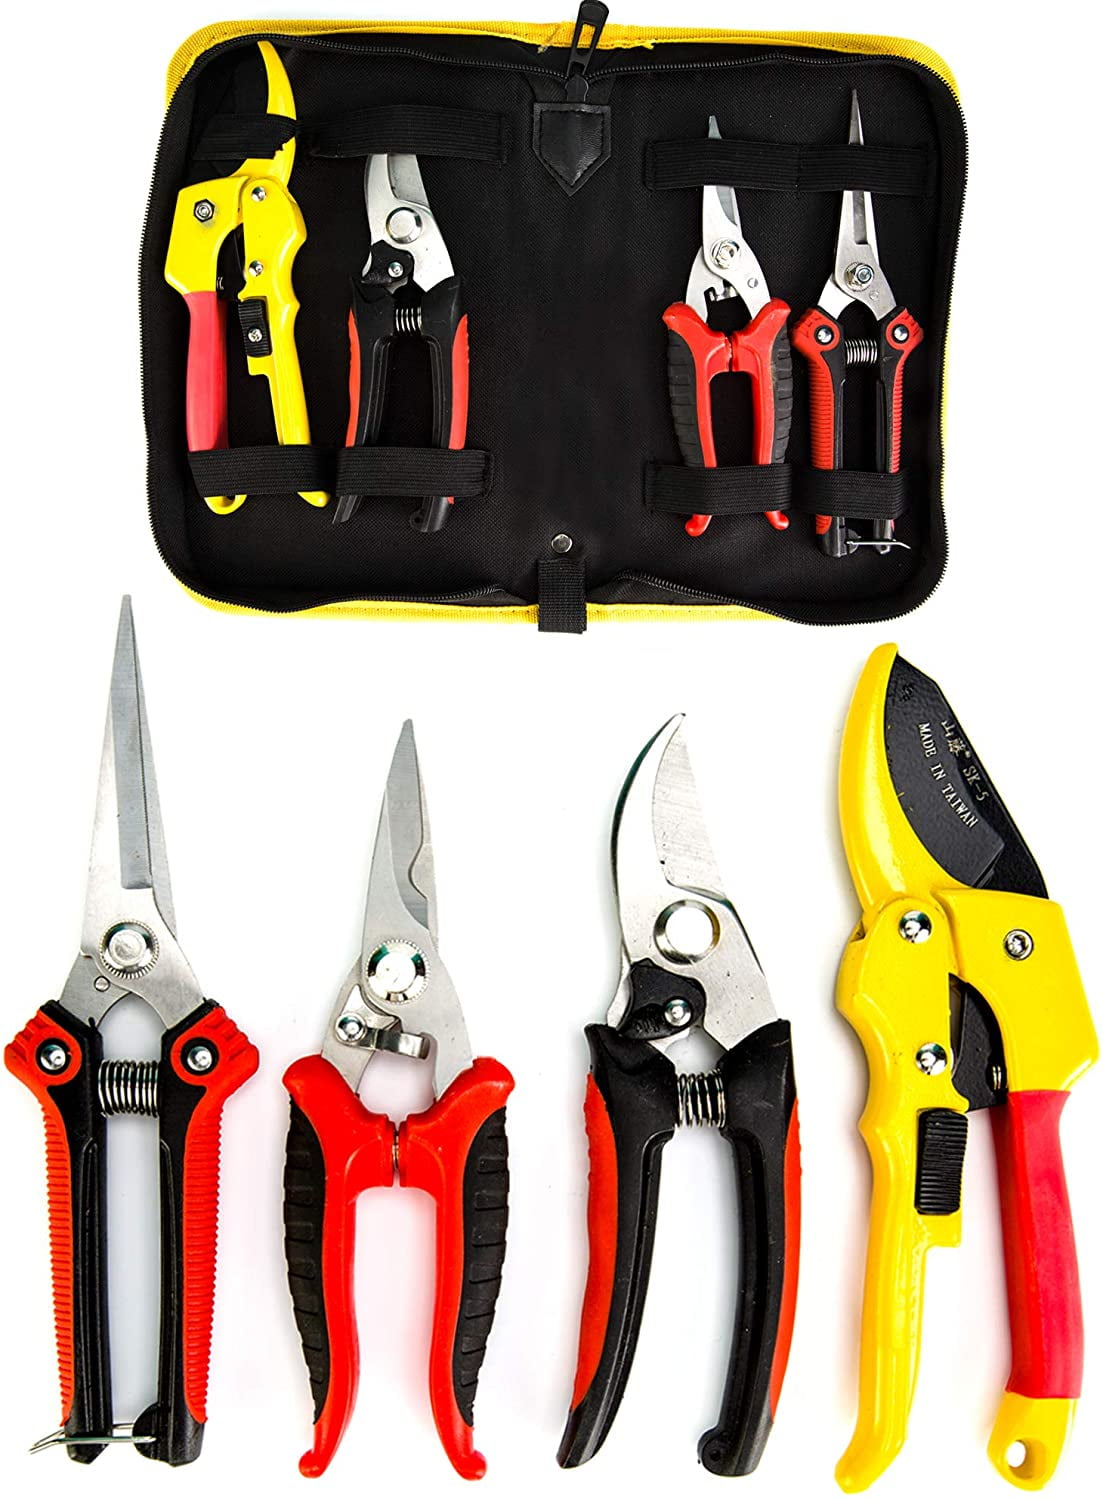 Gardening Hand Tools Set Stainless Steel Cutter Clippers Pruner Secatuers Shears 